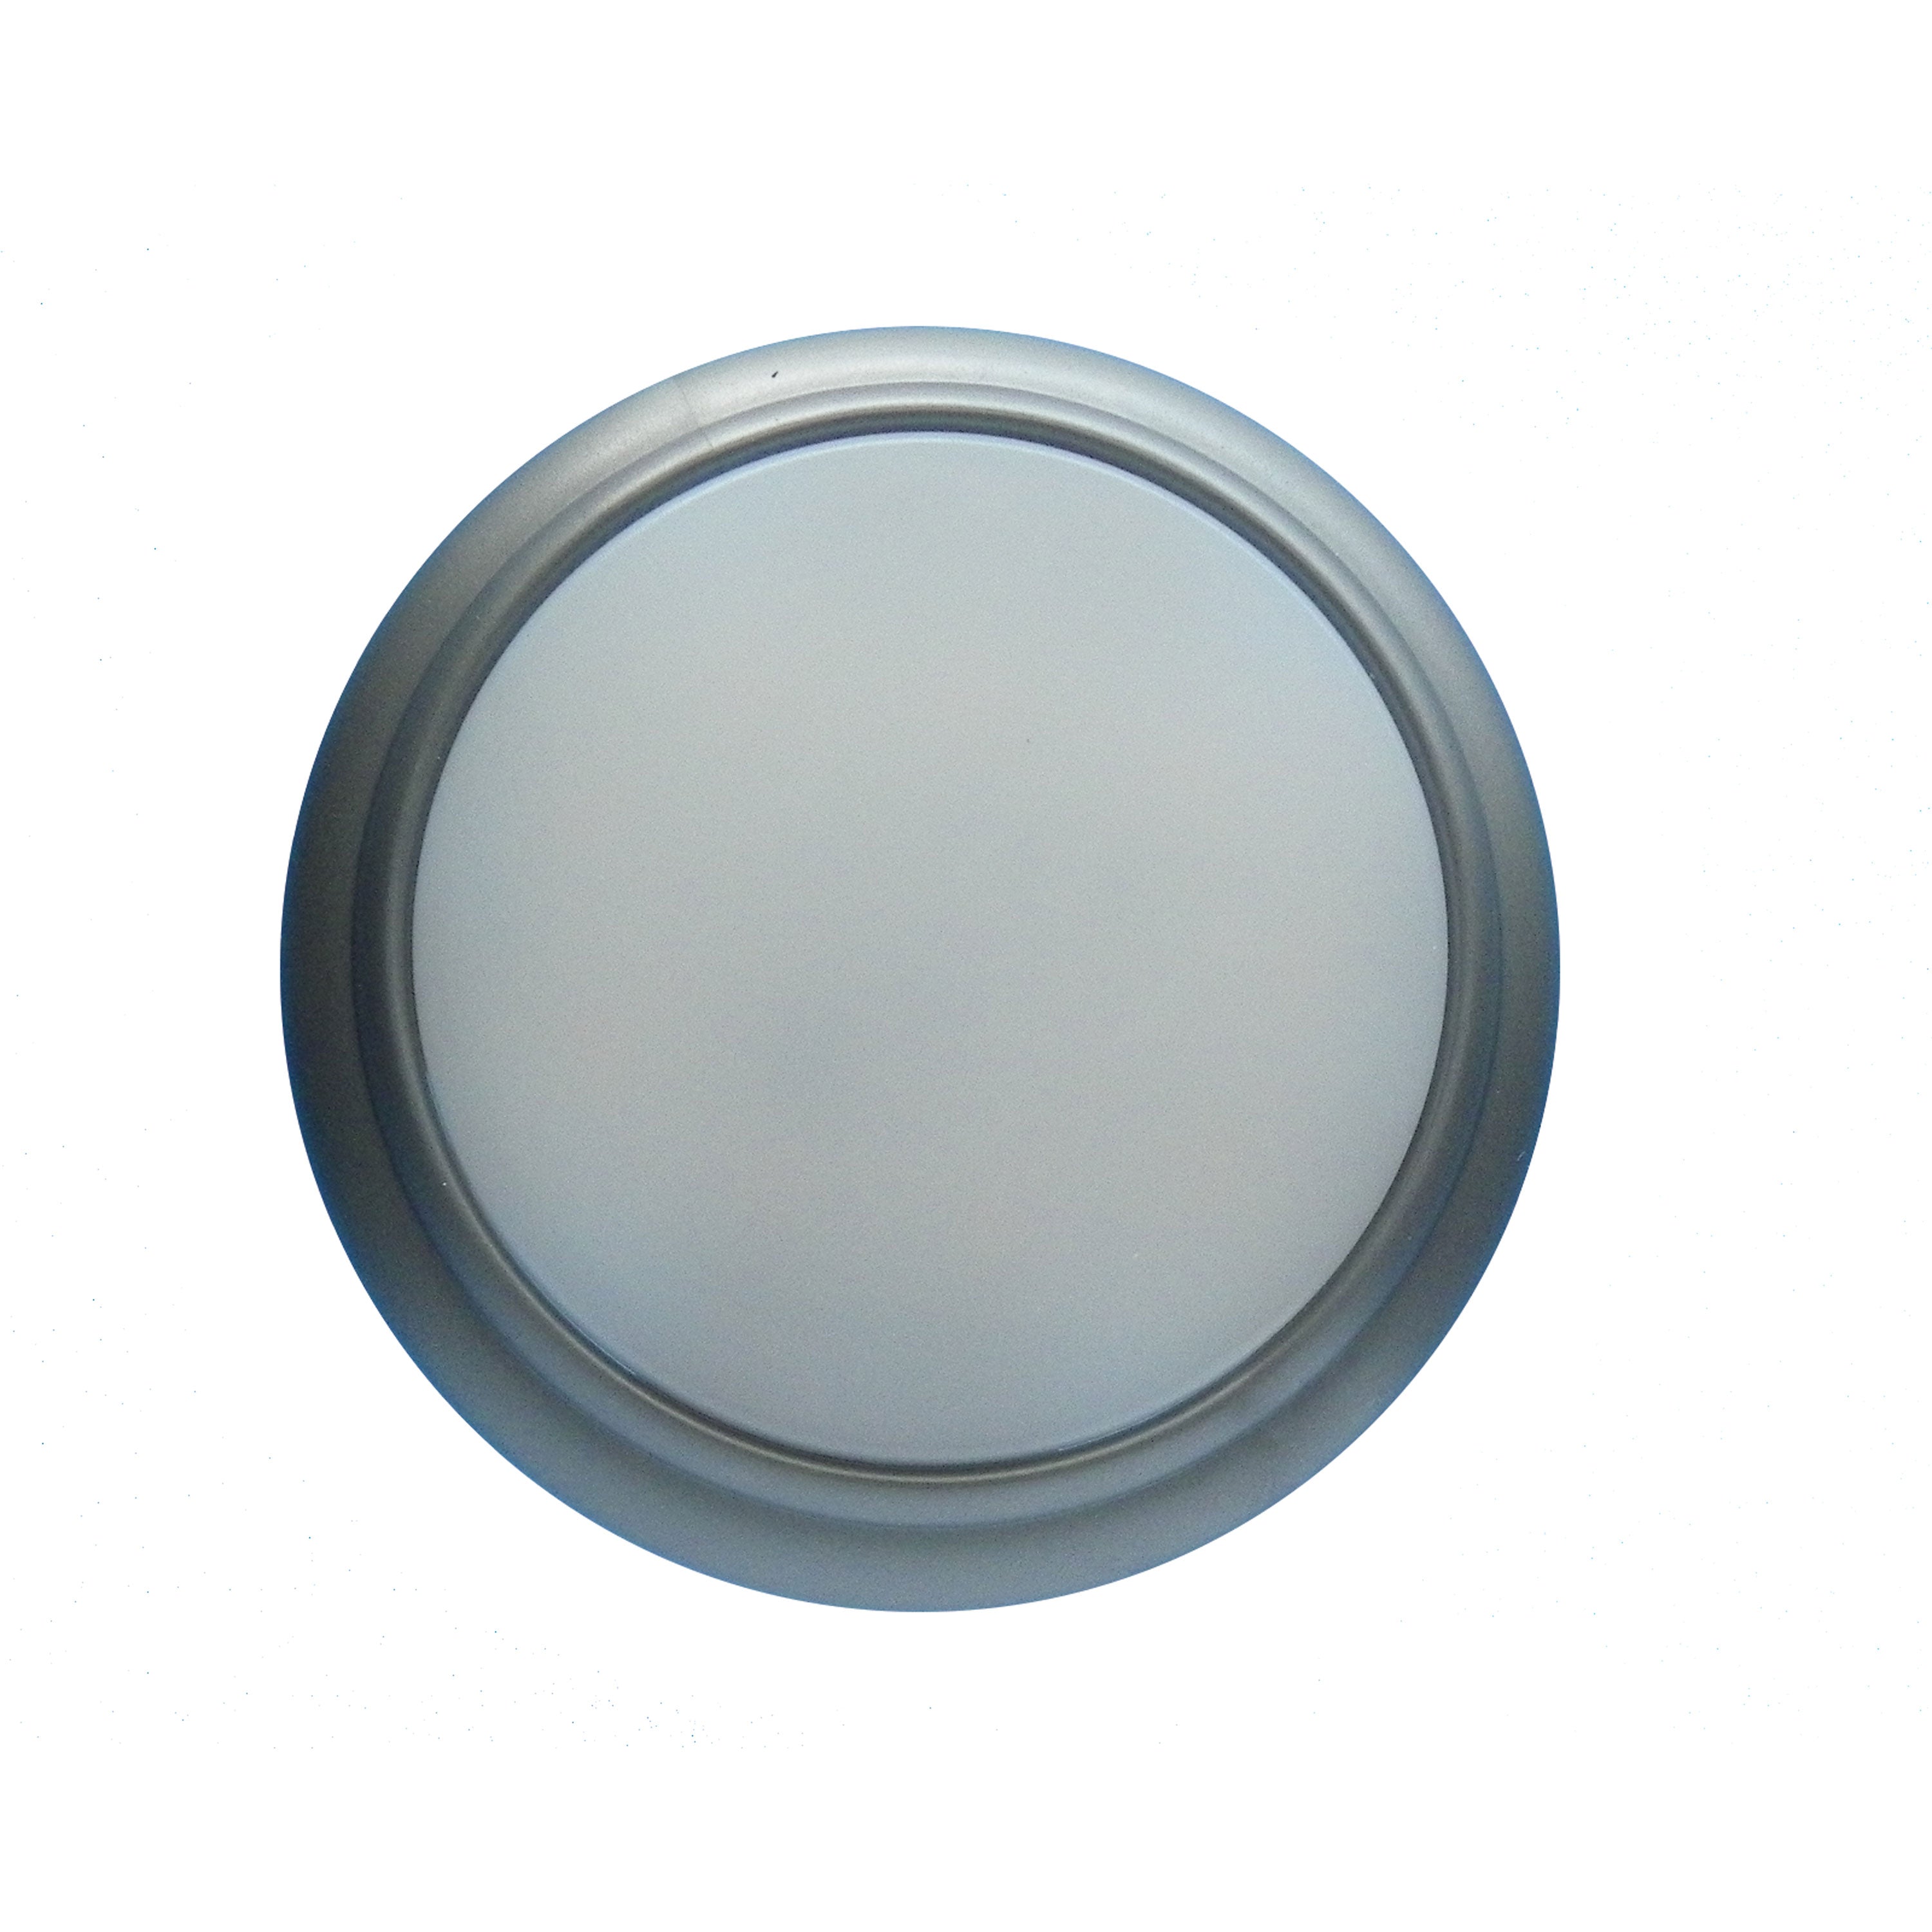 Fasteners Unlimited 001-1003N Surface Mount Round LED Ceiling/Under-Cabinet Light With Switch - Satin, 3 in. x 0.5 in.